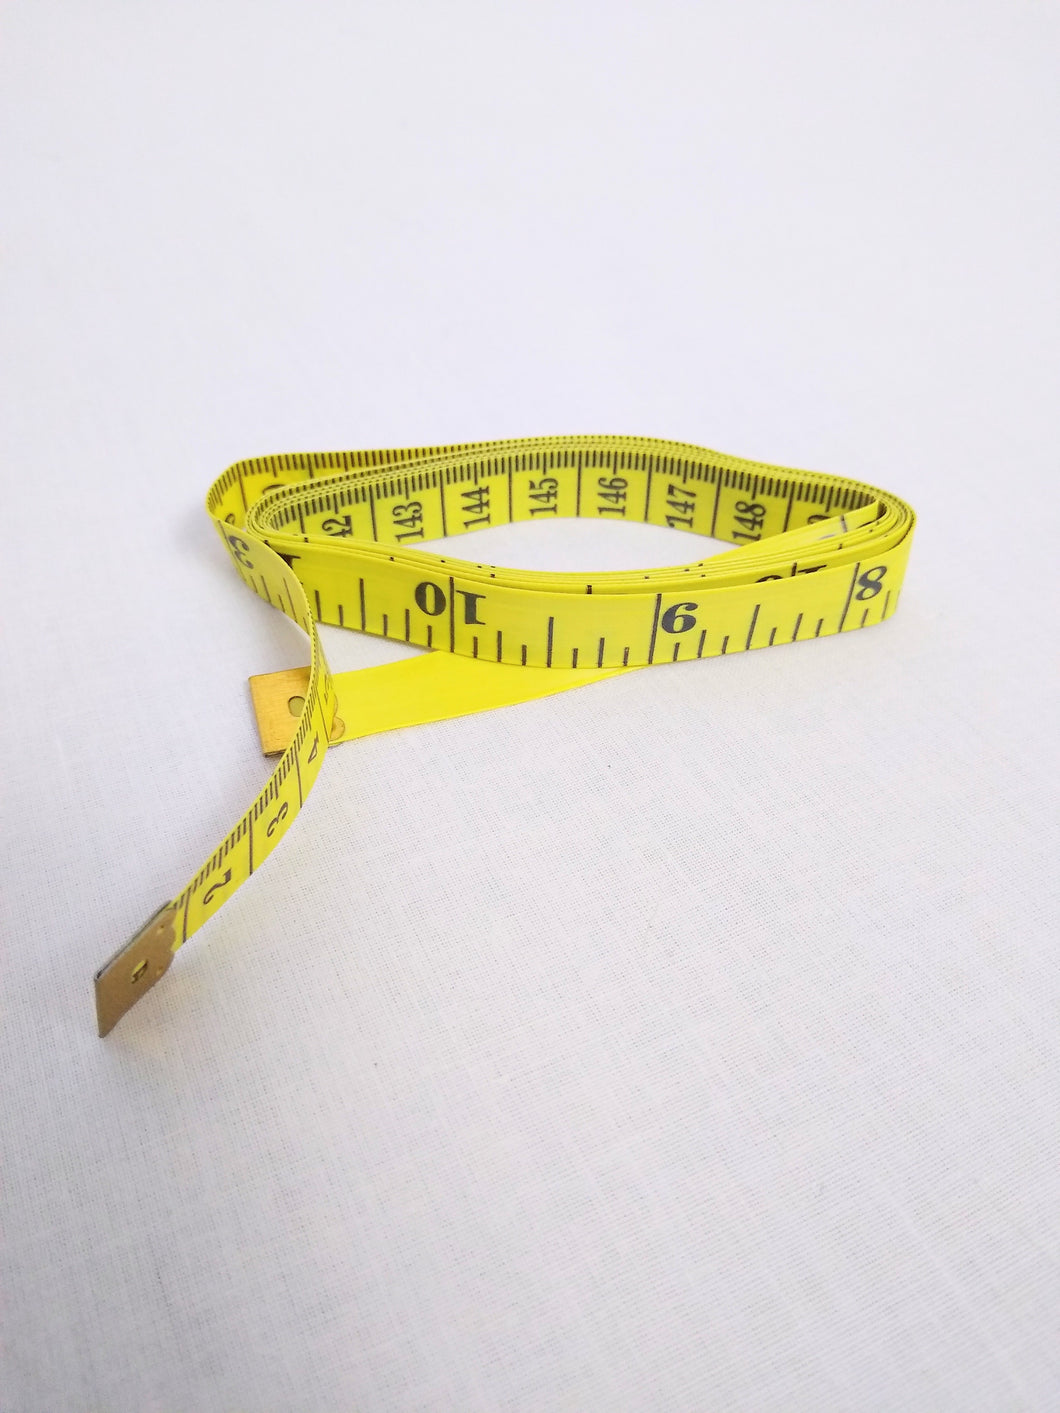 Flexible tape measure, accurate measuring, crafts, hobby